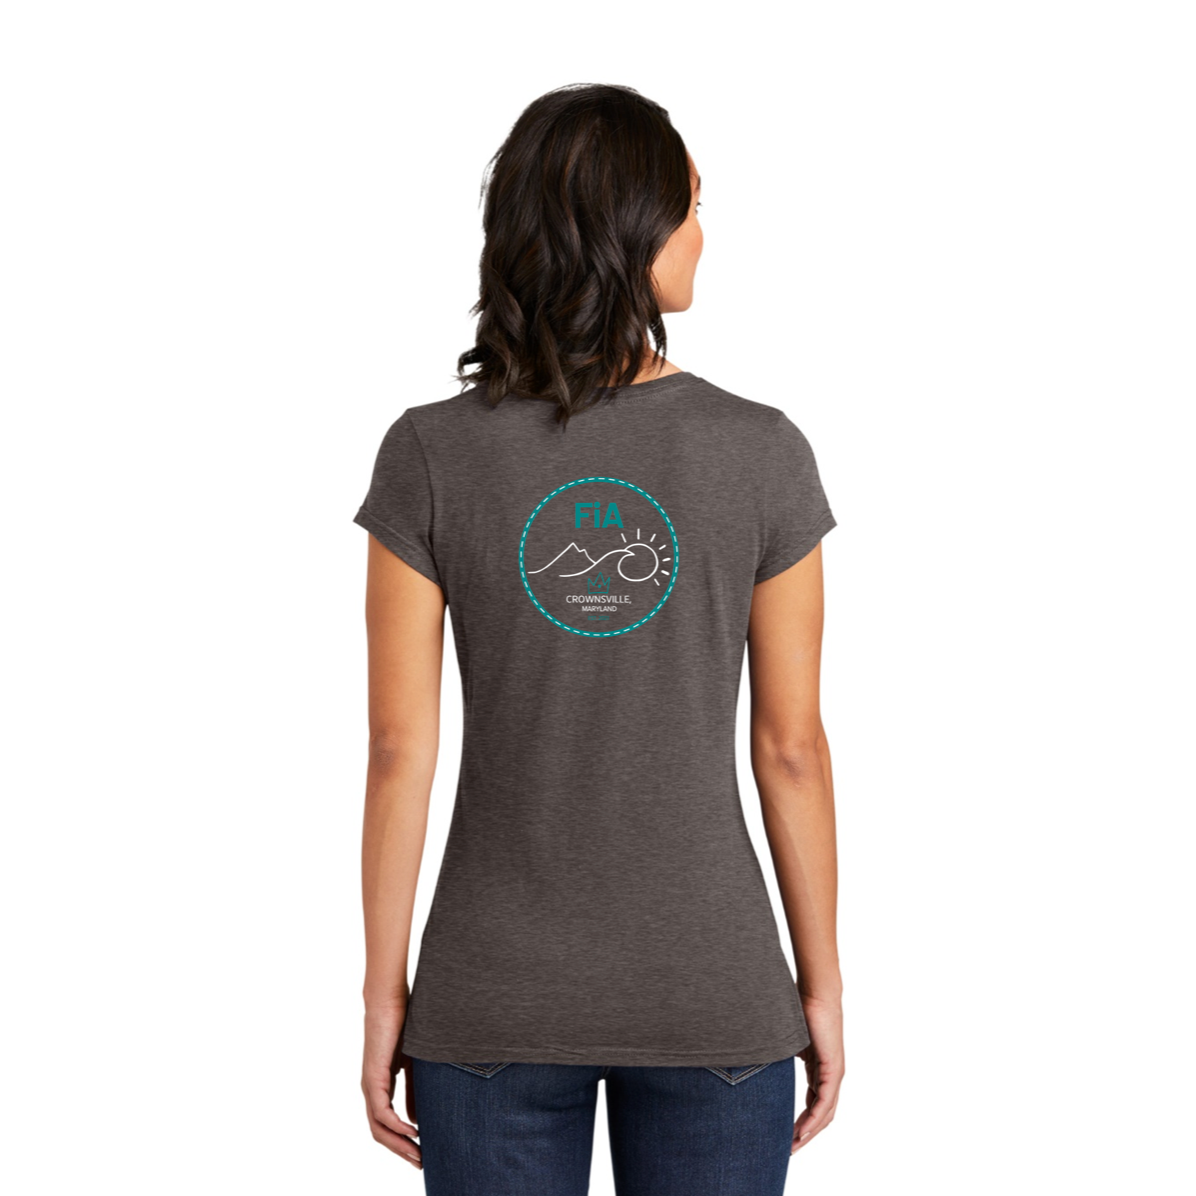 CLEARANCE ITEM - FiA Crownsville - District Women’s Fitted Very Important Tee (Heathered Brown / Small)